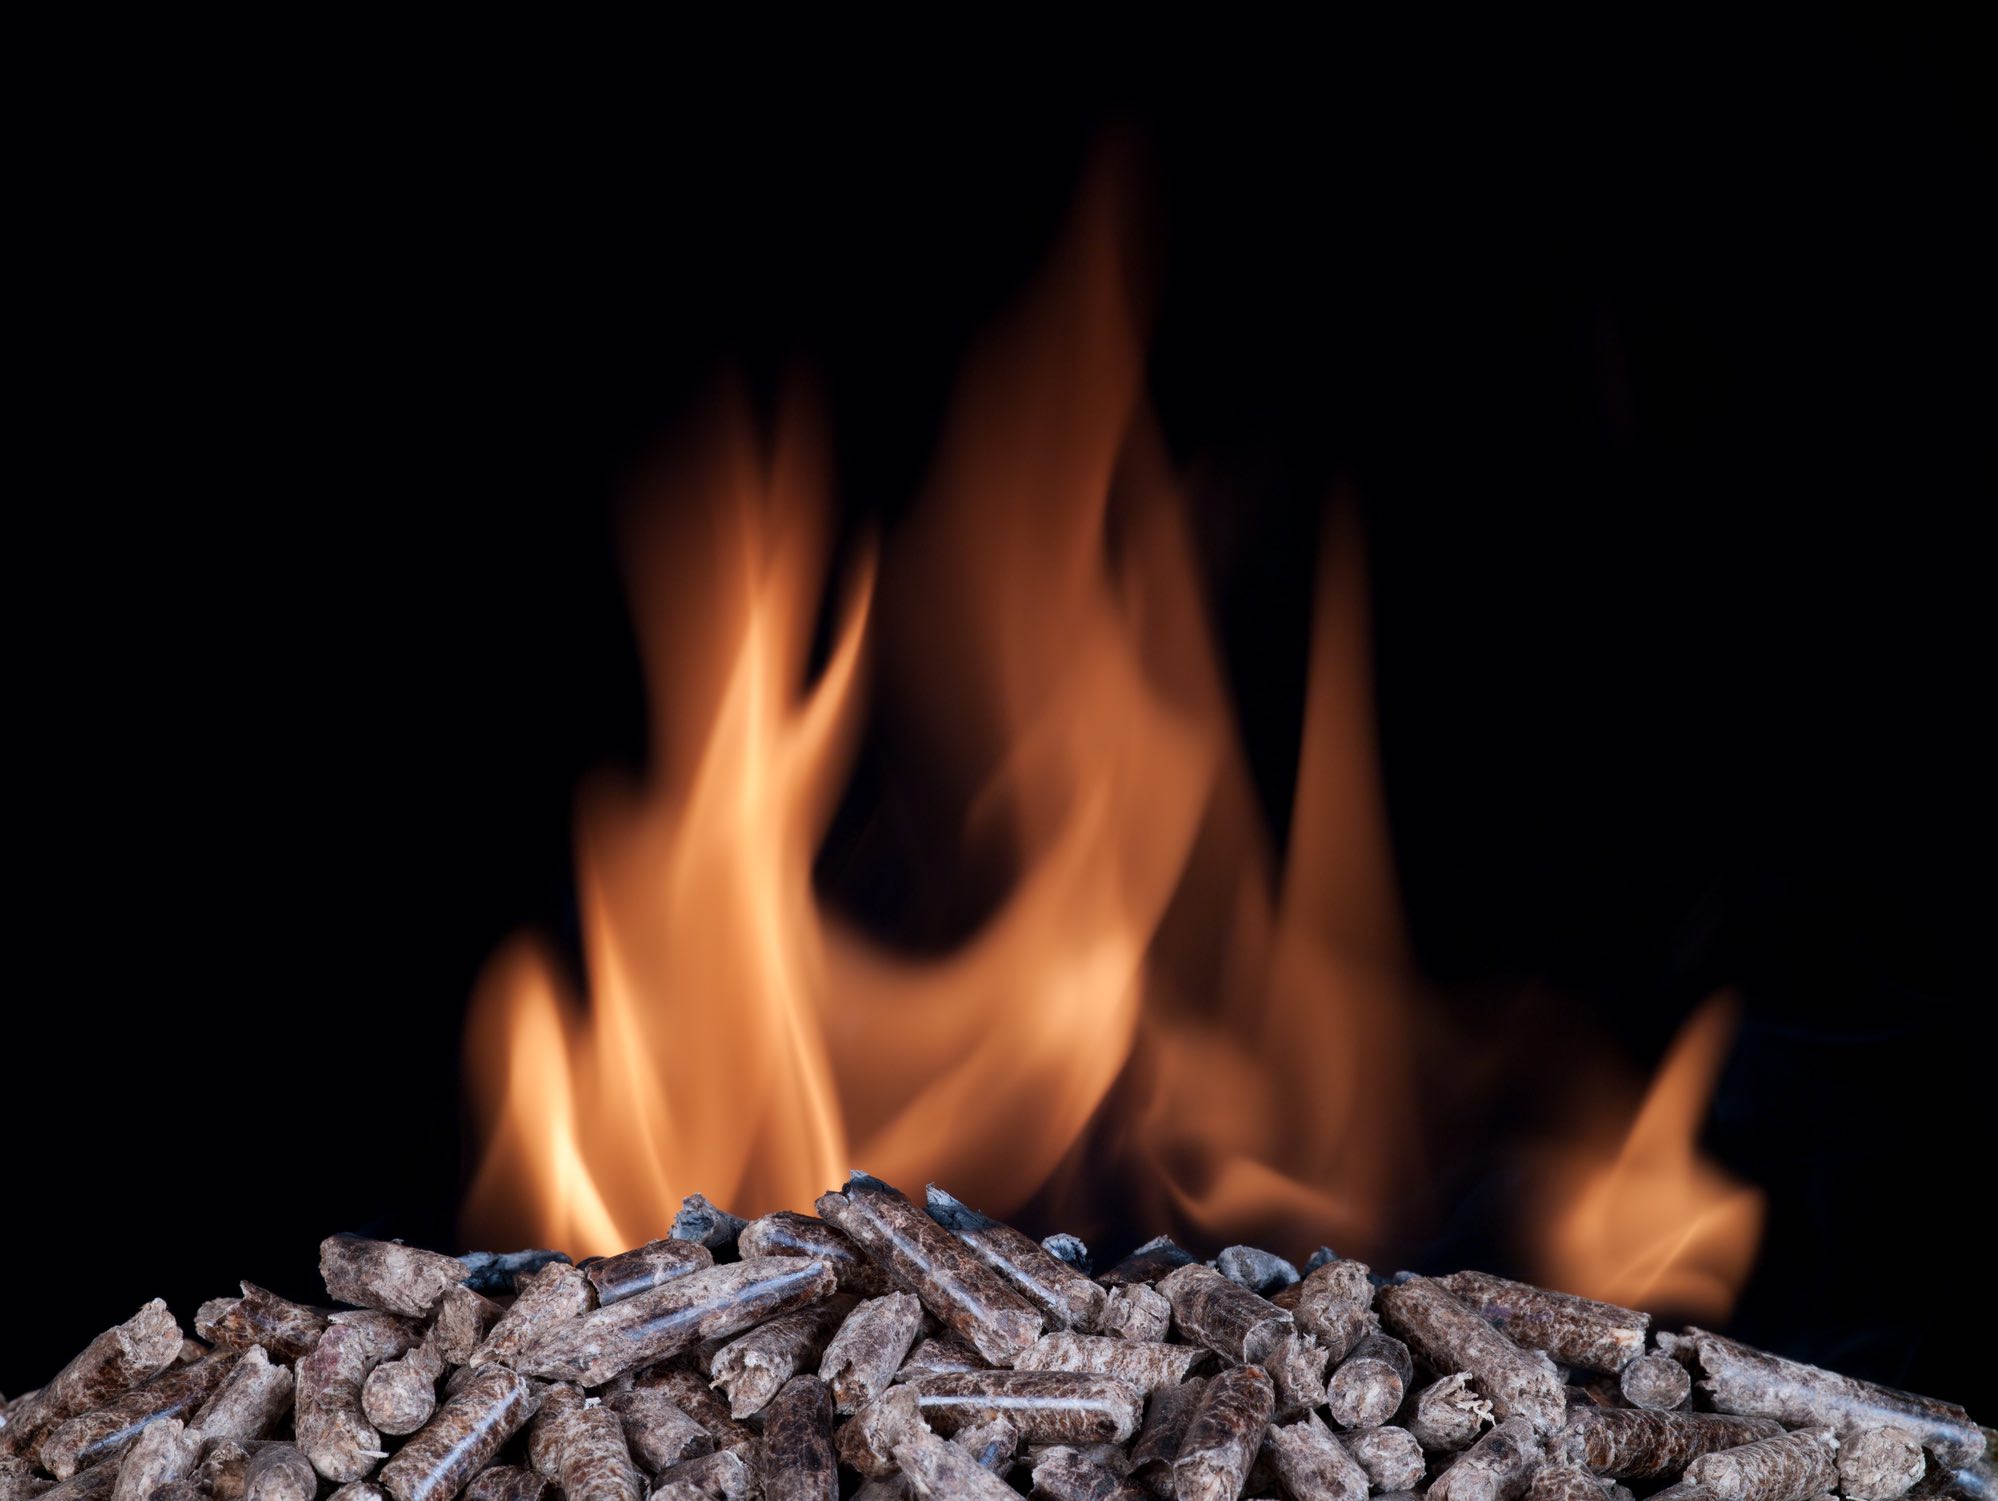 A pile of Carbon Neutral, clean-energy wood pellets burning in front of a black background.